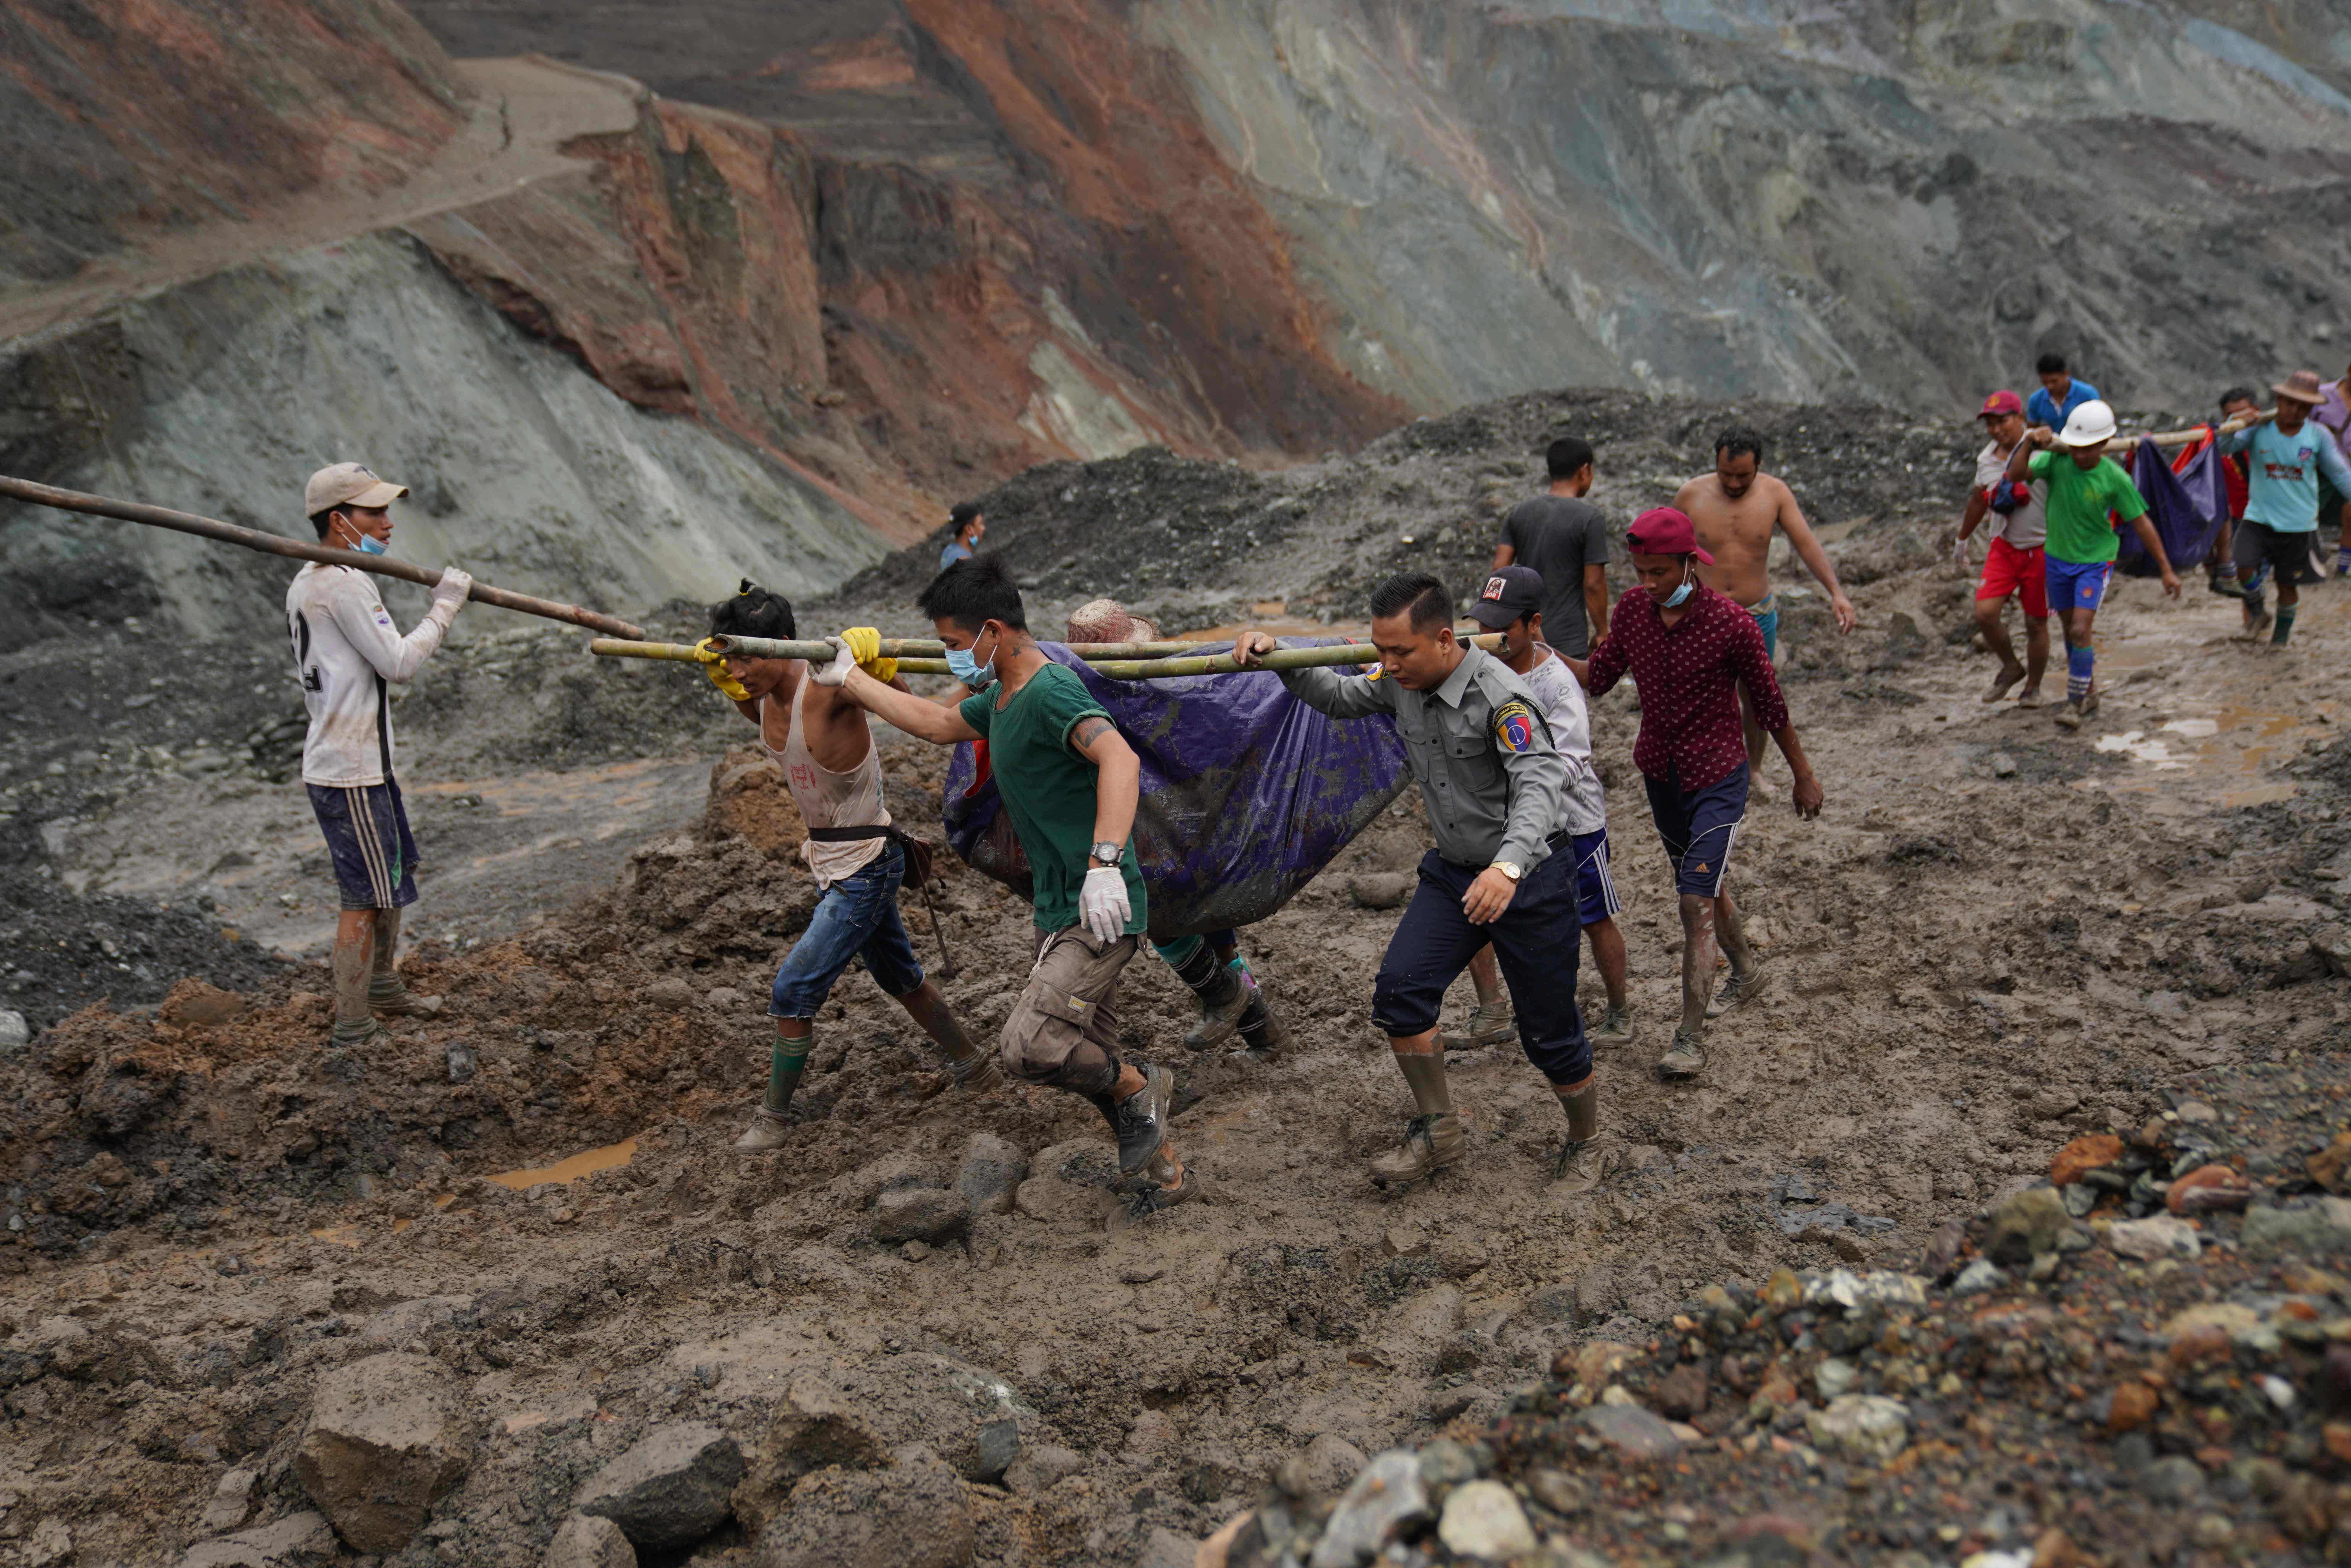 Rescuers recover bodies near the landslide area in the jade mining site in Hpakhant in Kachin state on July 2, 2020. - The battered bodies of more than 120 jade miners were pulled from a sea of mud after a landslide in northern Myanmar on July 2 after one of the worst-ever accidents to hit the treacherous industry. (Photo by AFP)